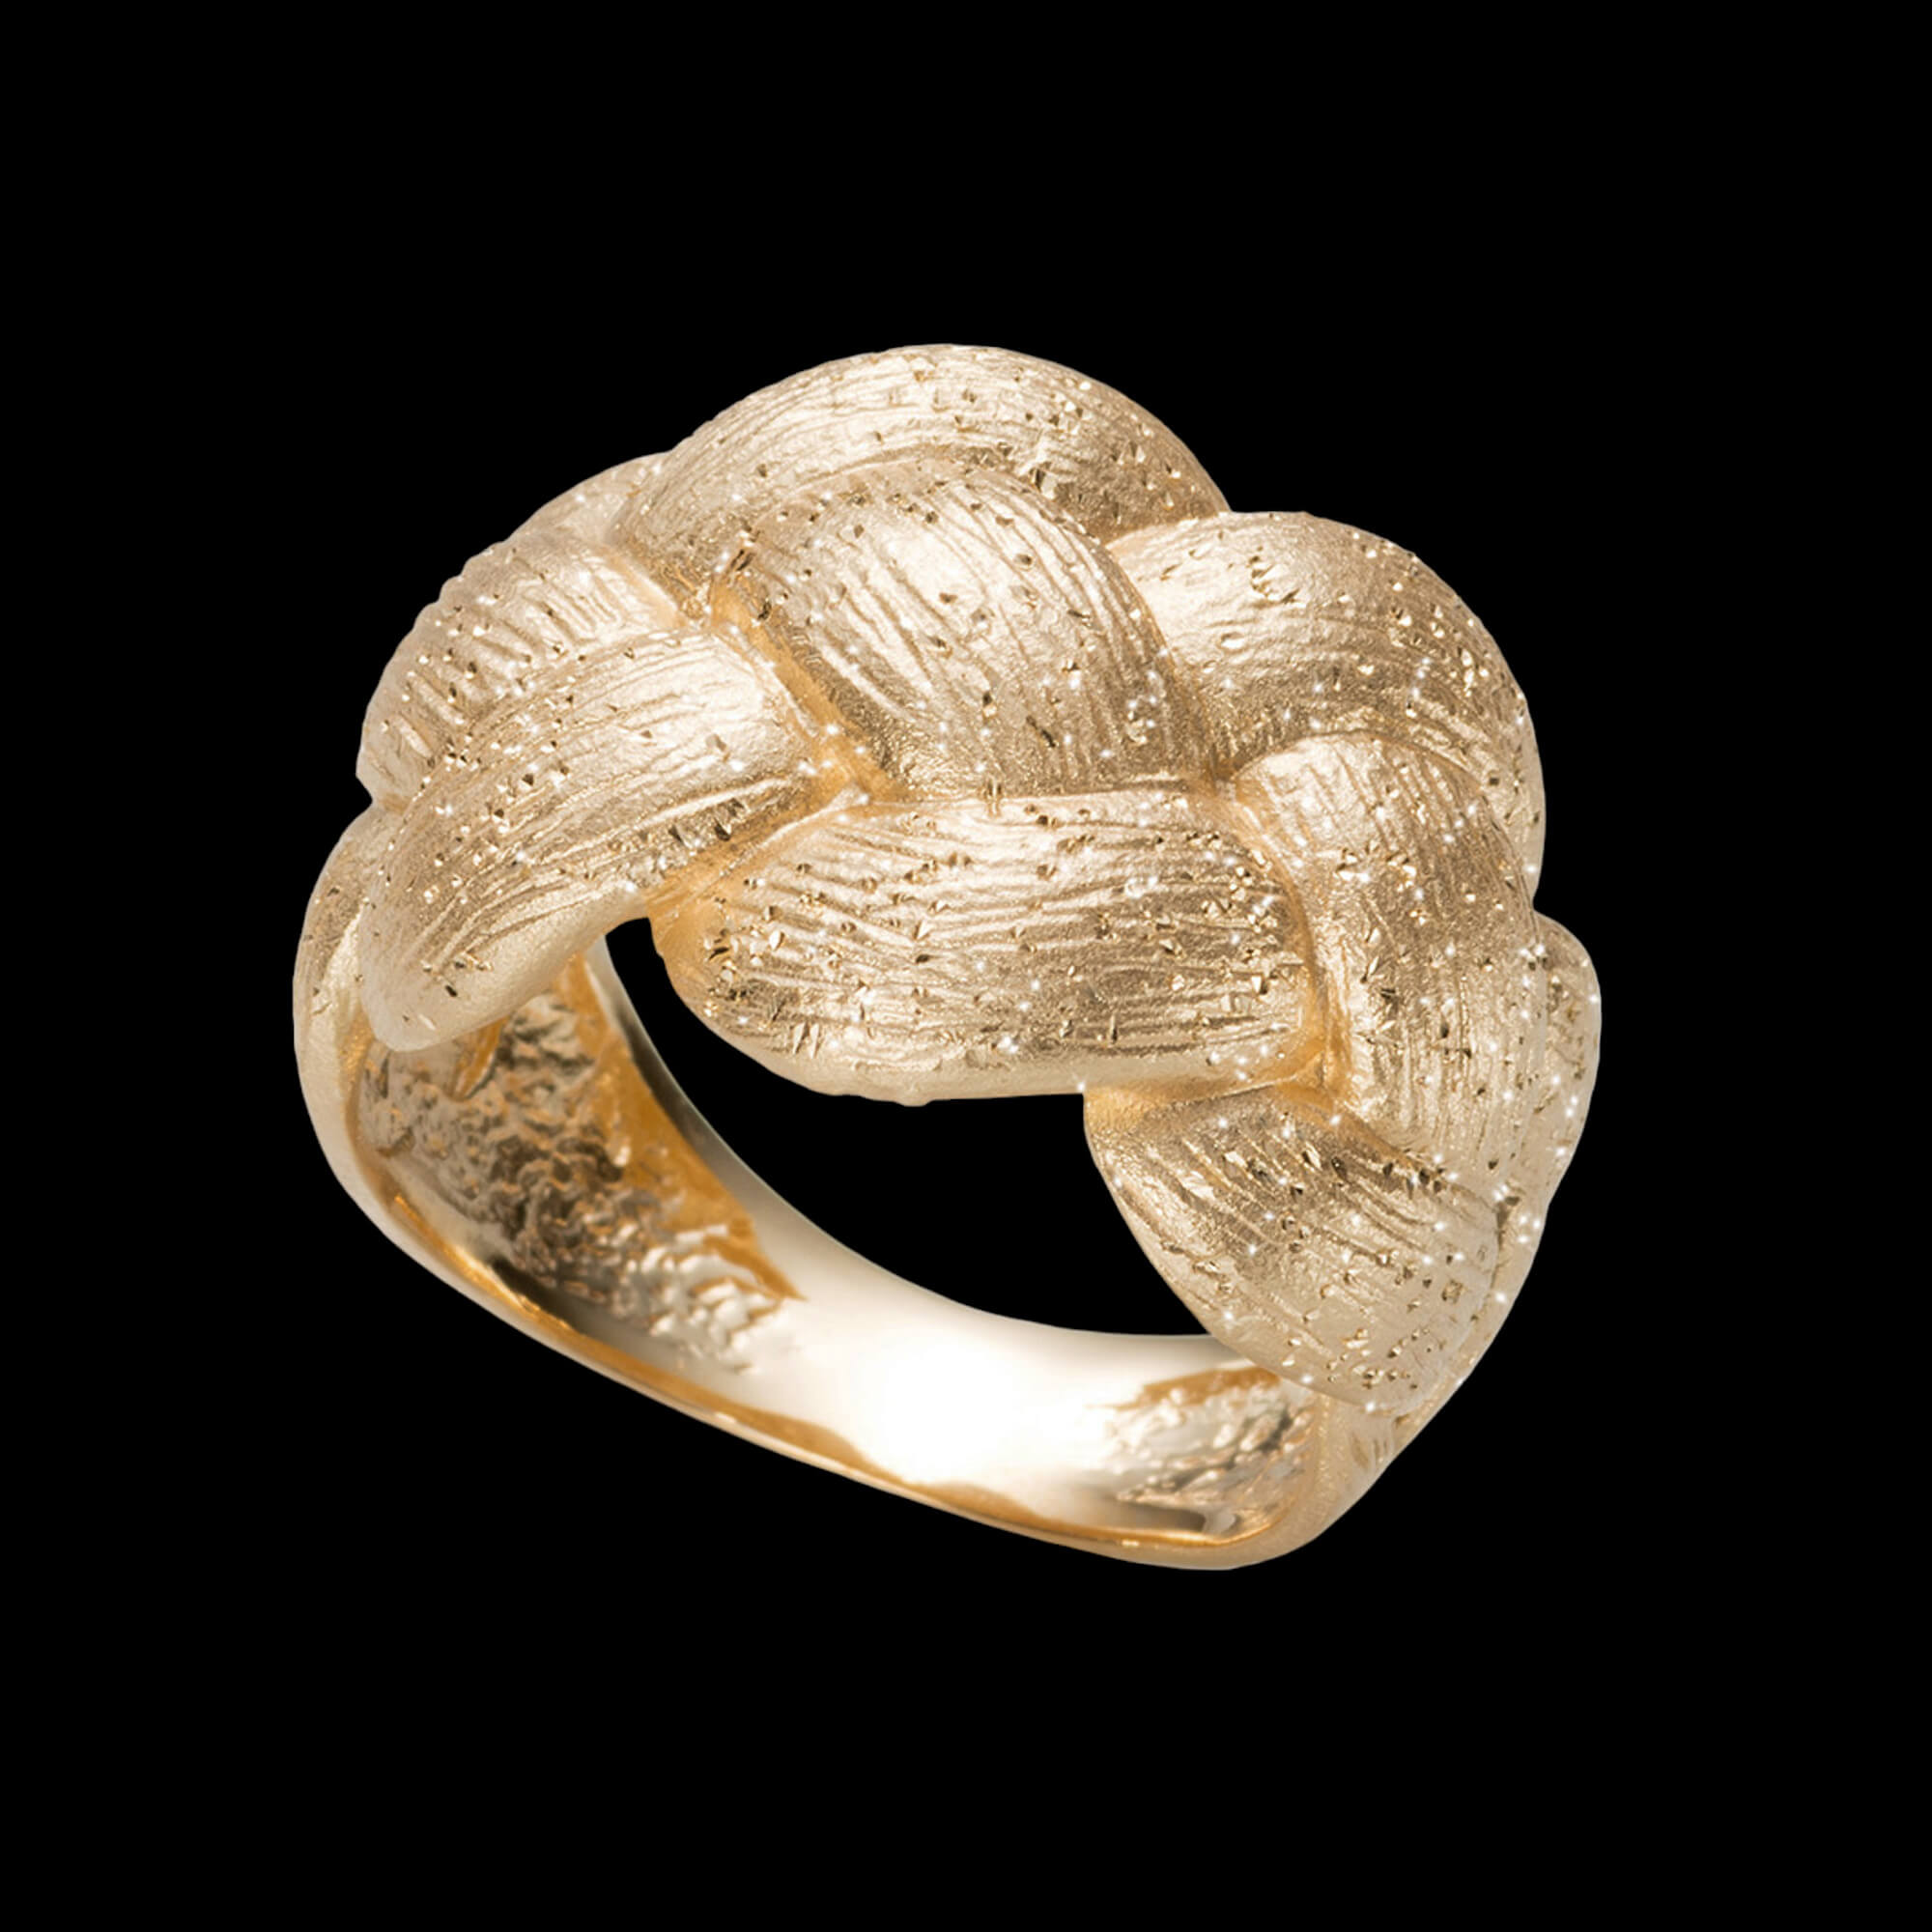 Beautiful gilt and braided ring